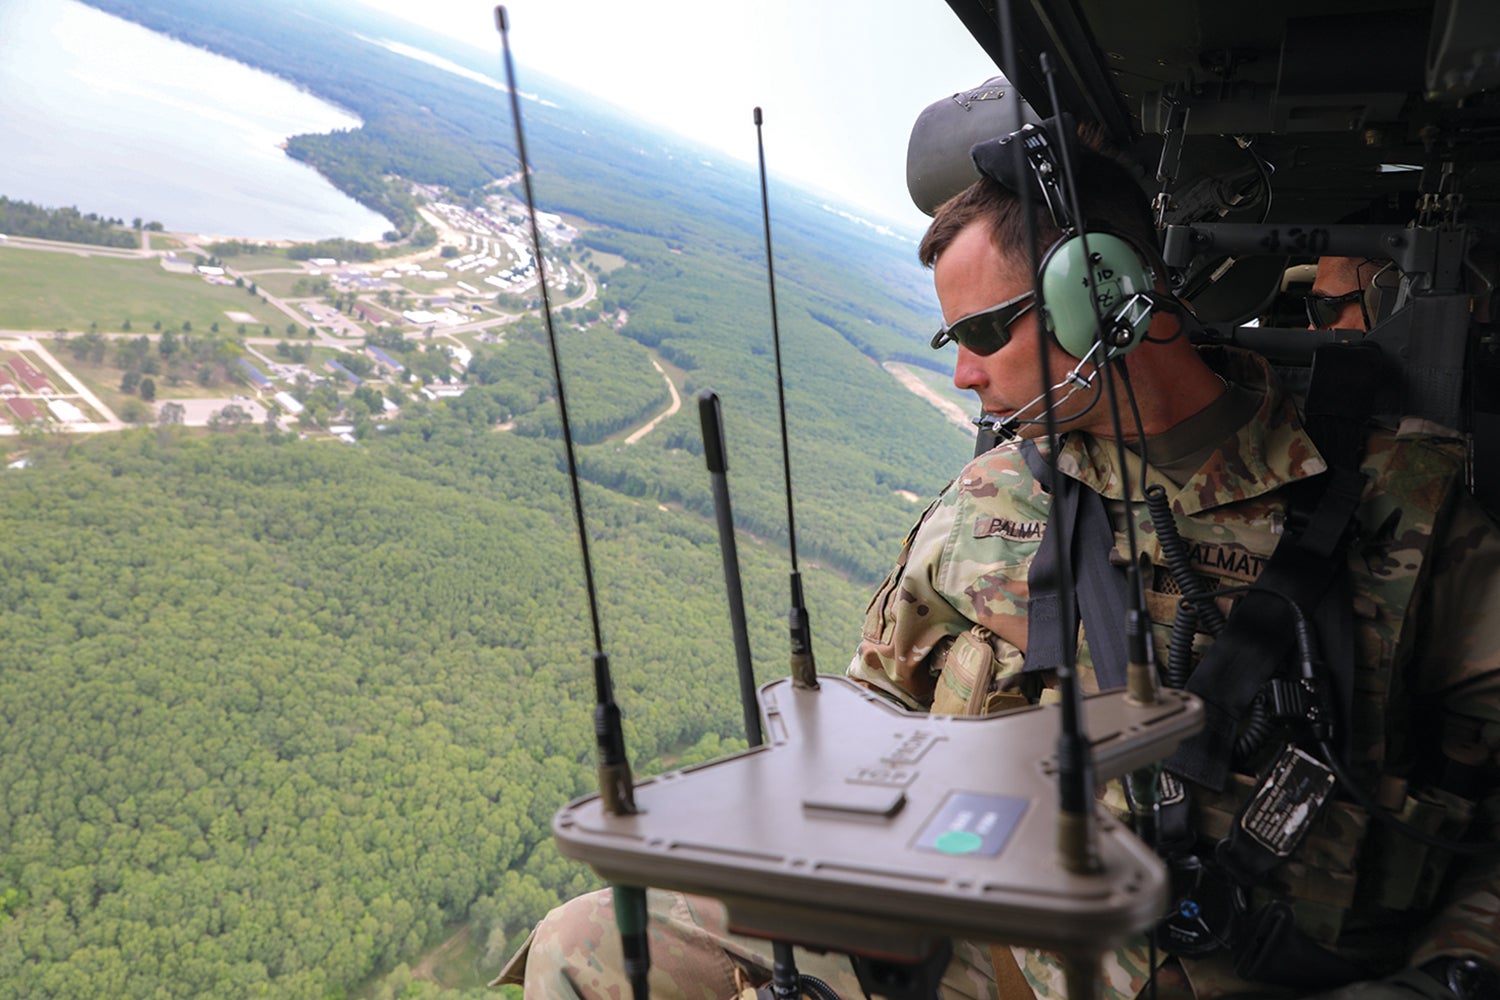 Capt. Tucker Palmatier, a cyber electronic warfare officer with the 37th Infantry Brigade Combat Team, monitors radio equipment at Camp Grayling. (Credit: Ohio Army National Guard/Staff Sgt. Scott Fletcher)